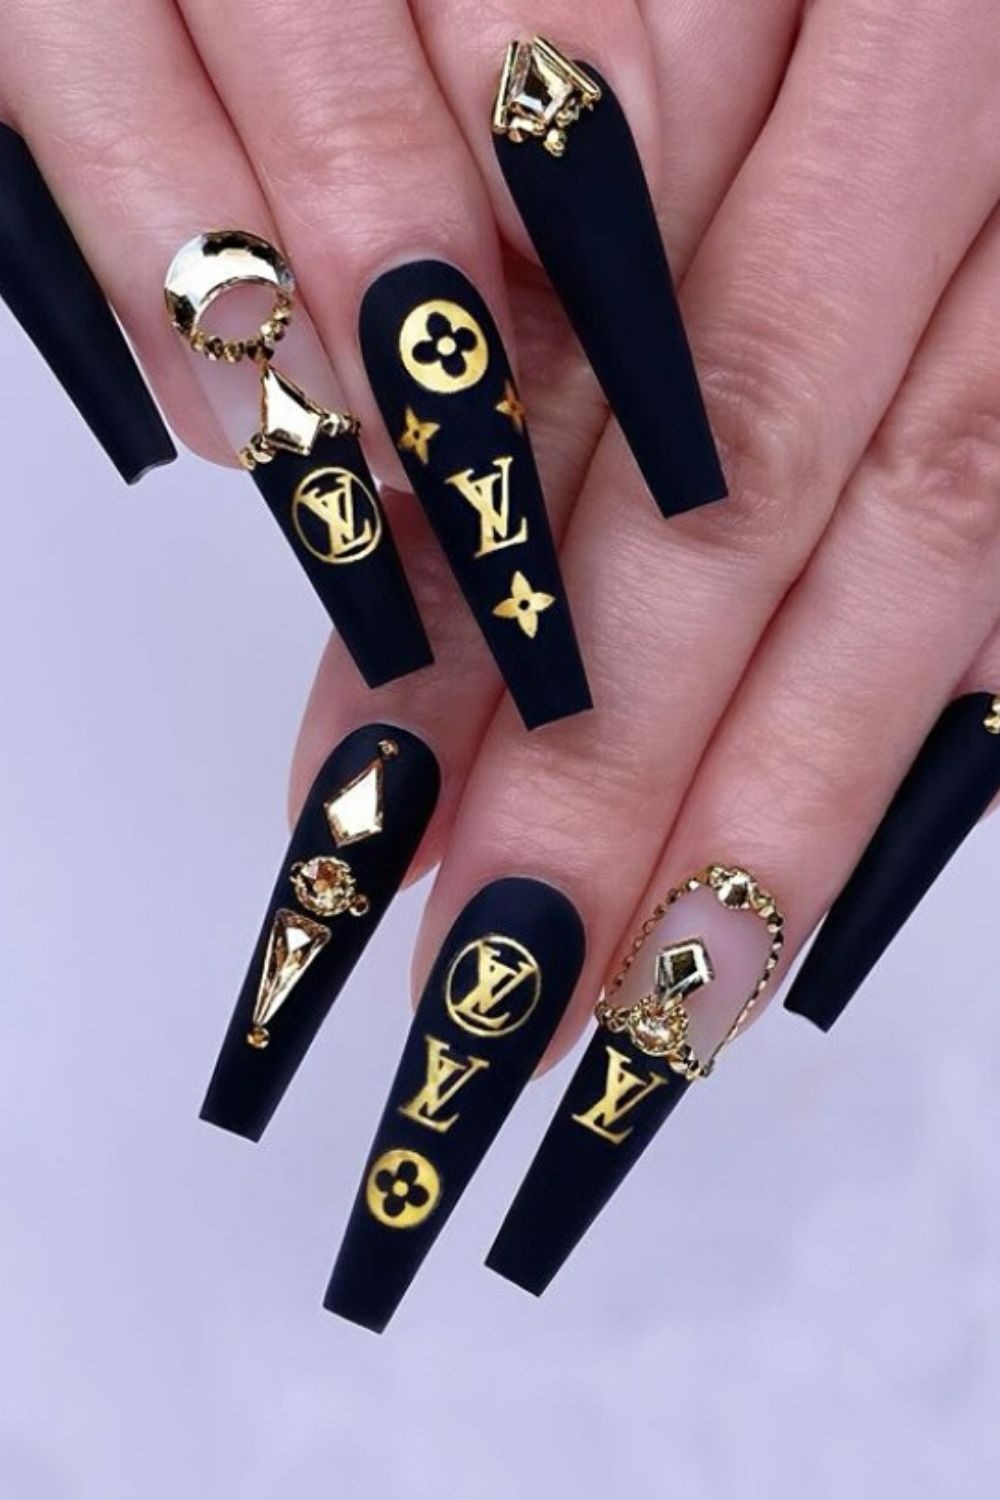 Ive been painting by hand again  Louis Vuitton nail art  rNails